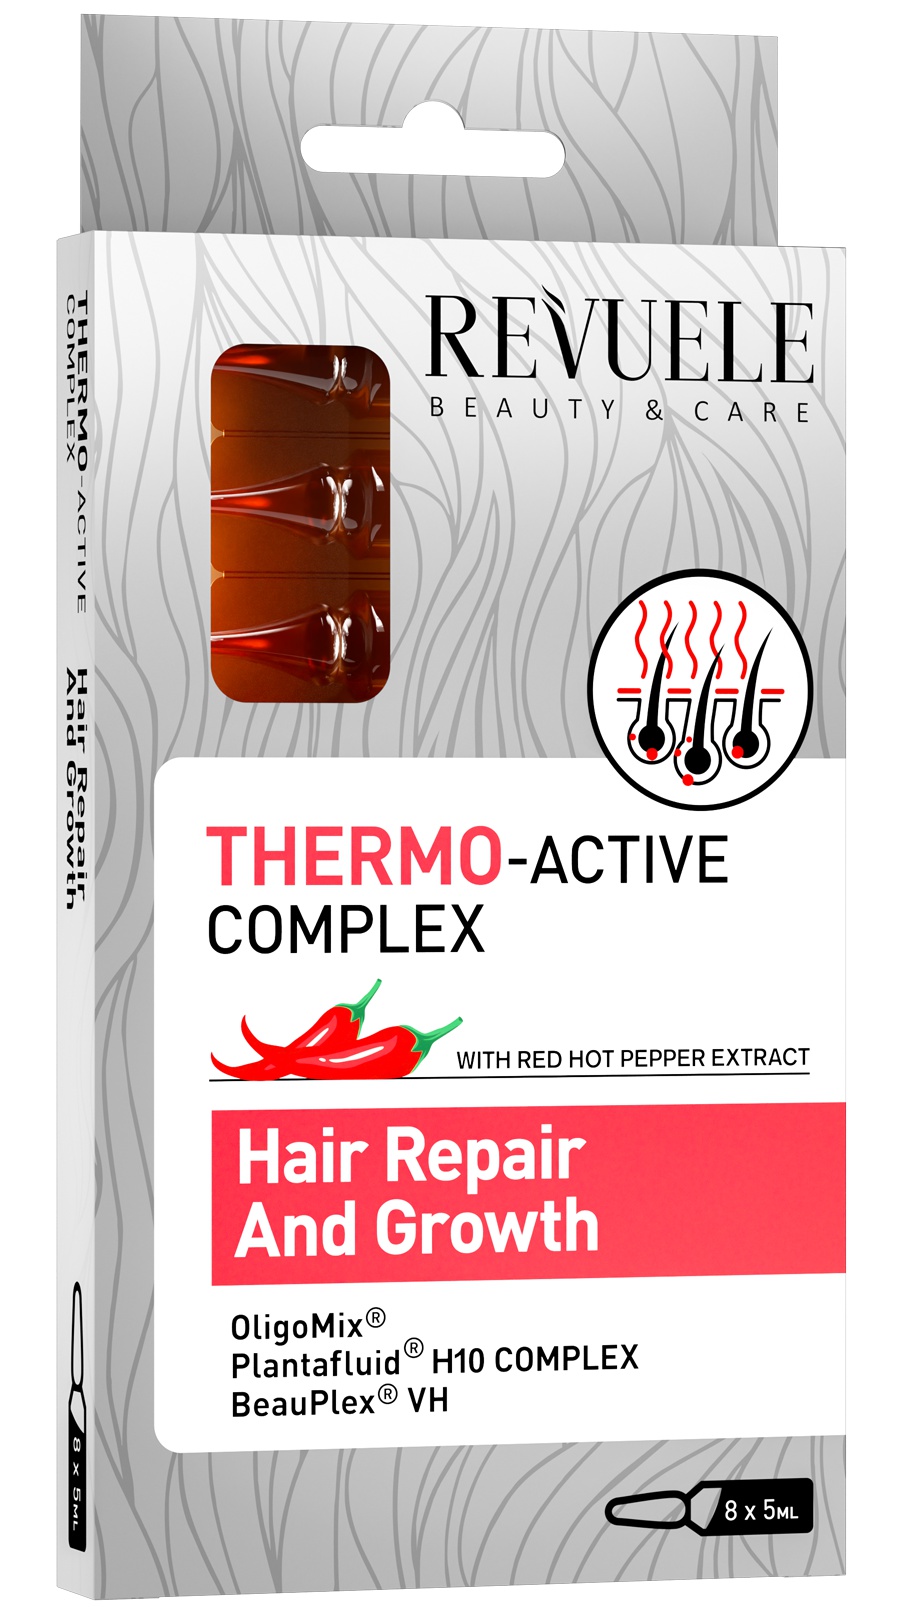 Revuele Thermo Active Complex Hair Repair And Growth